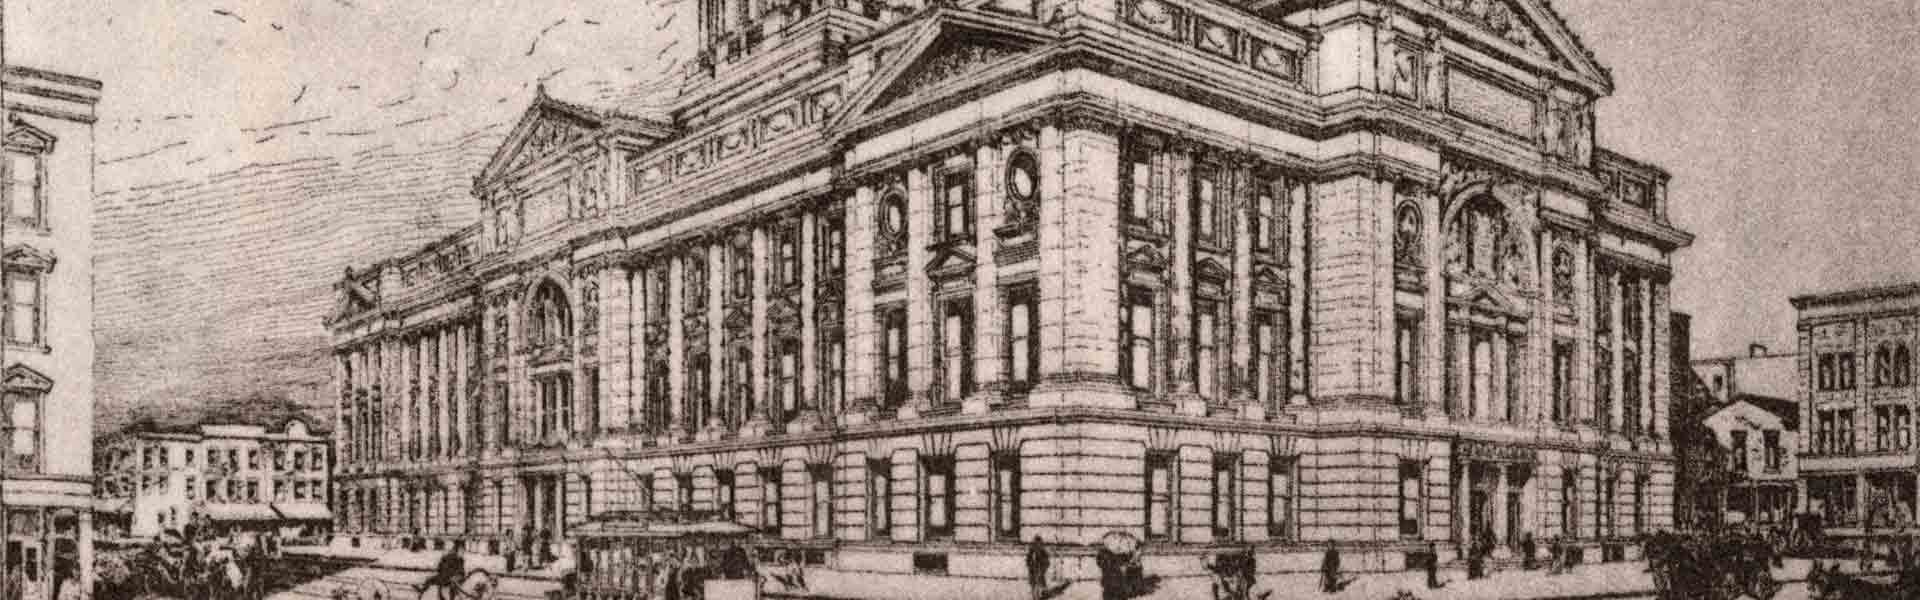 Drawing of Allen County Courthouse, 1898